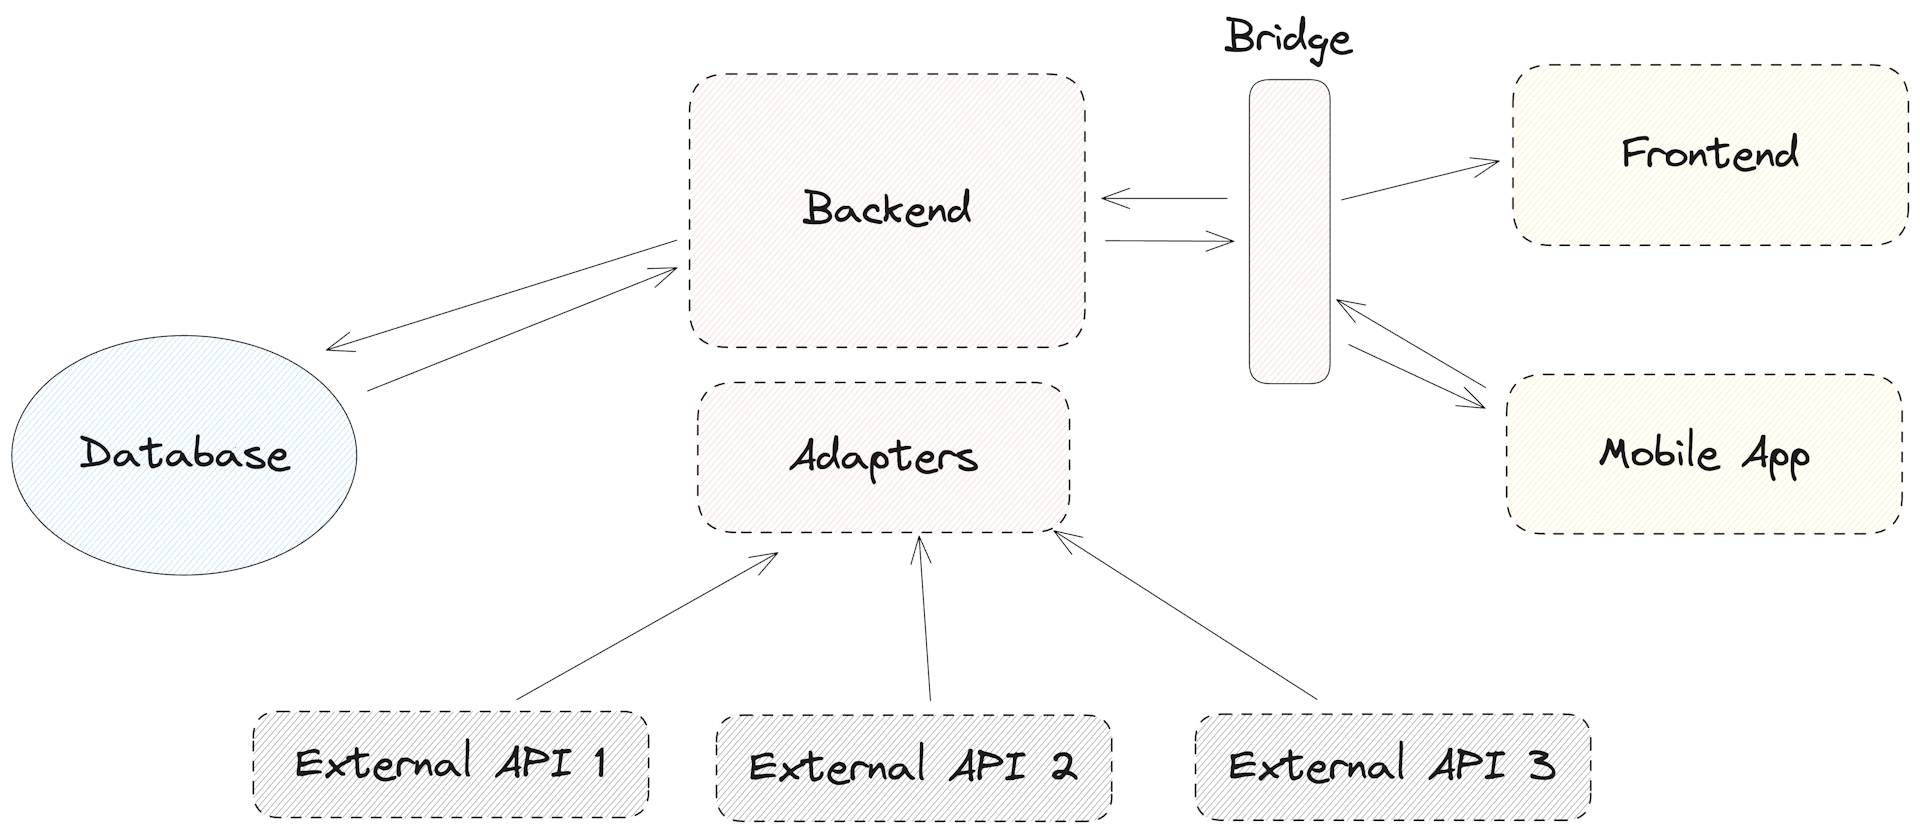 Example architecture vision